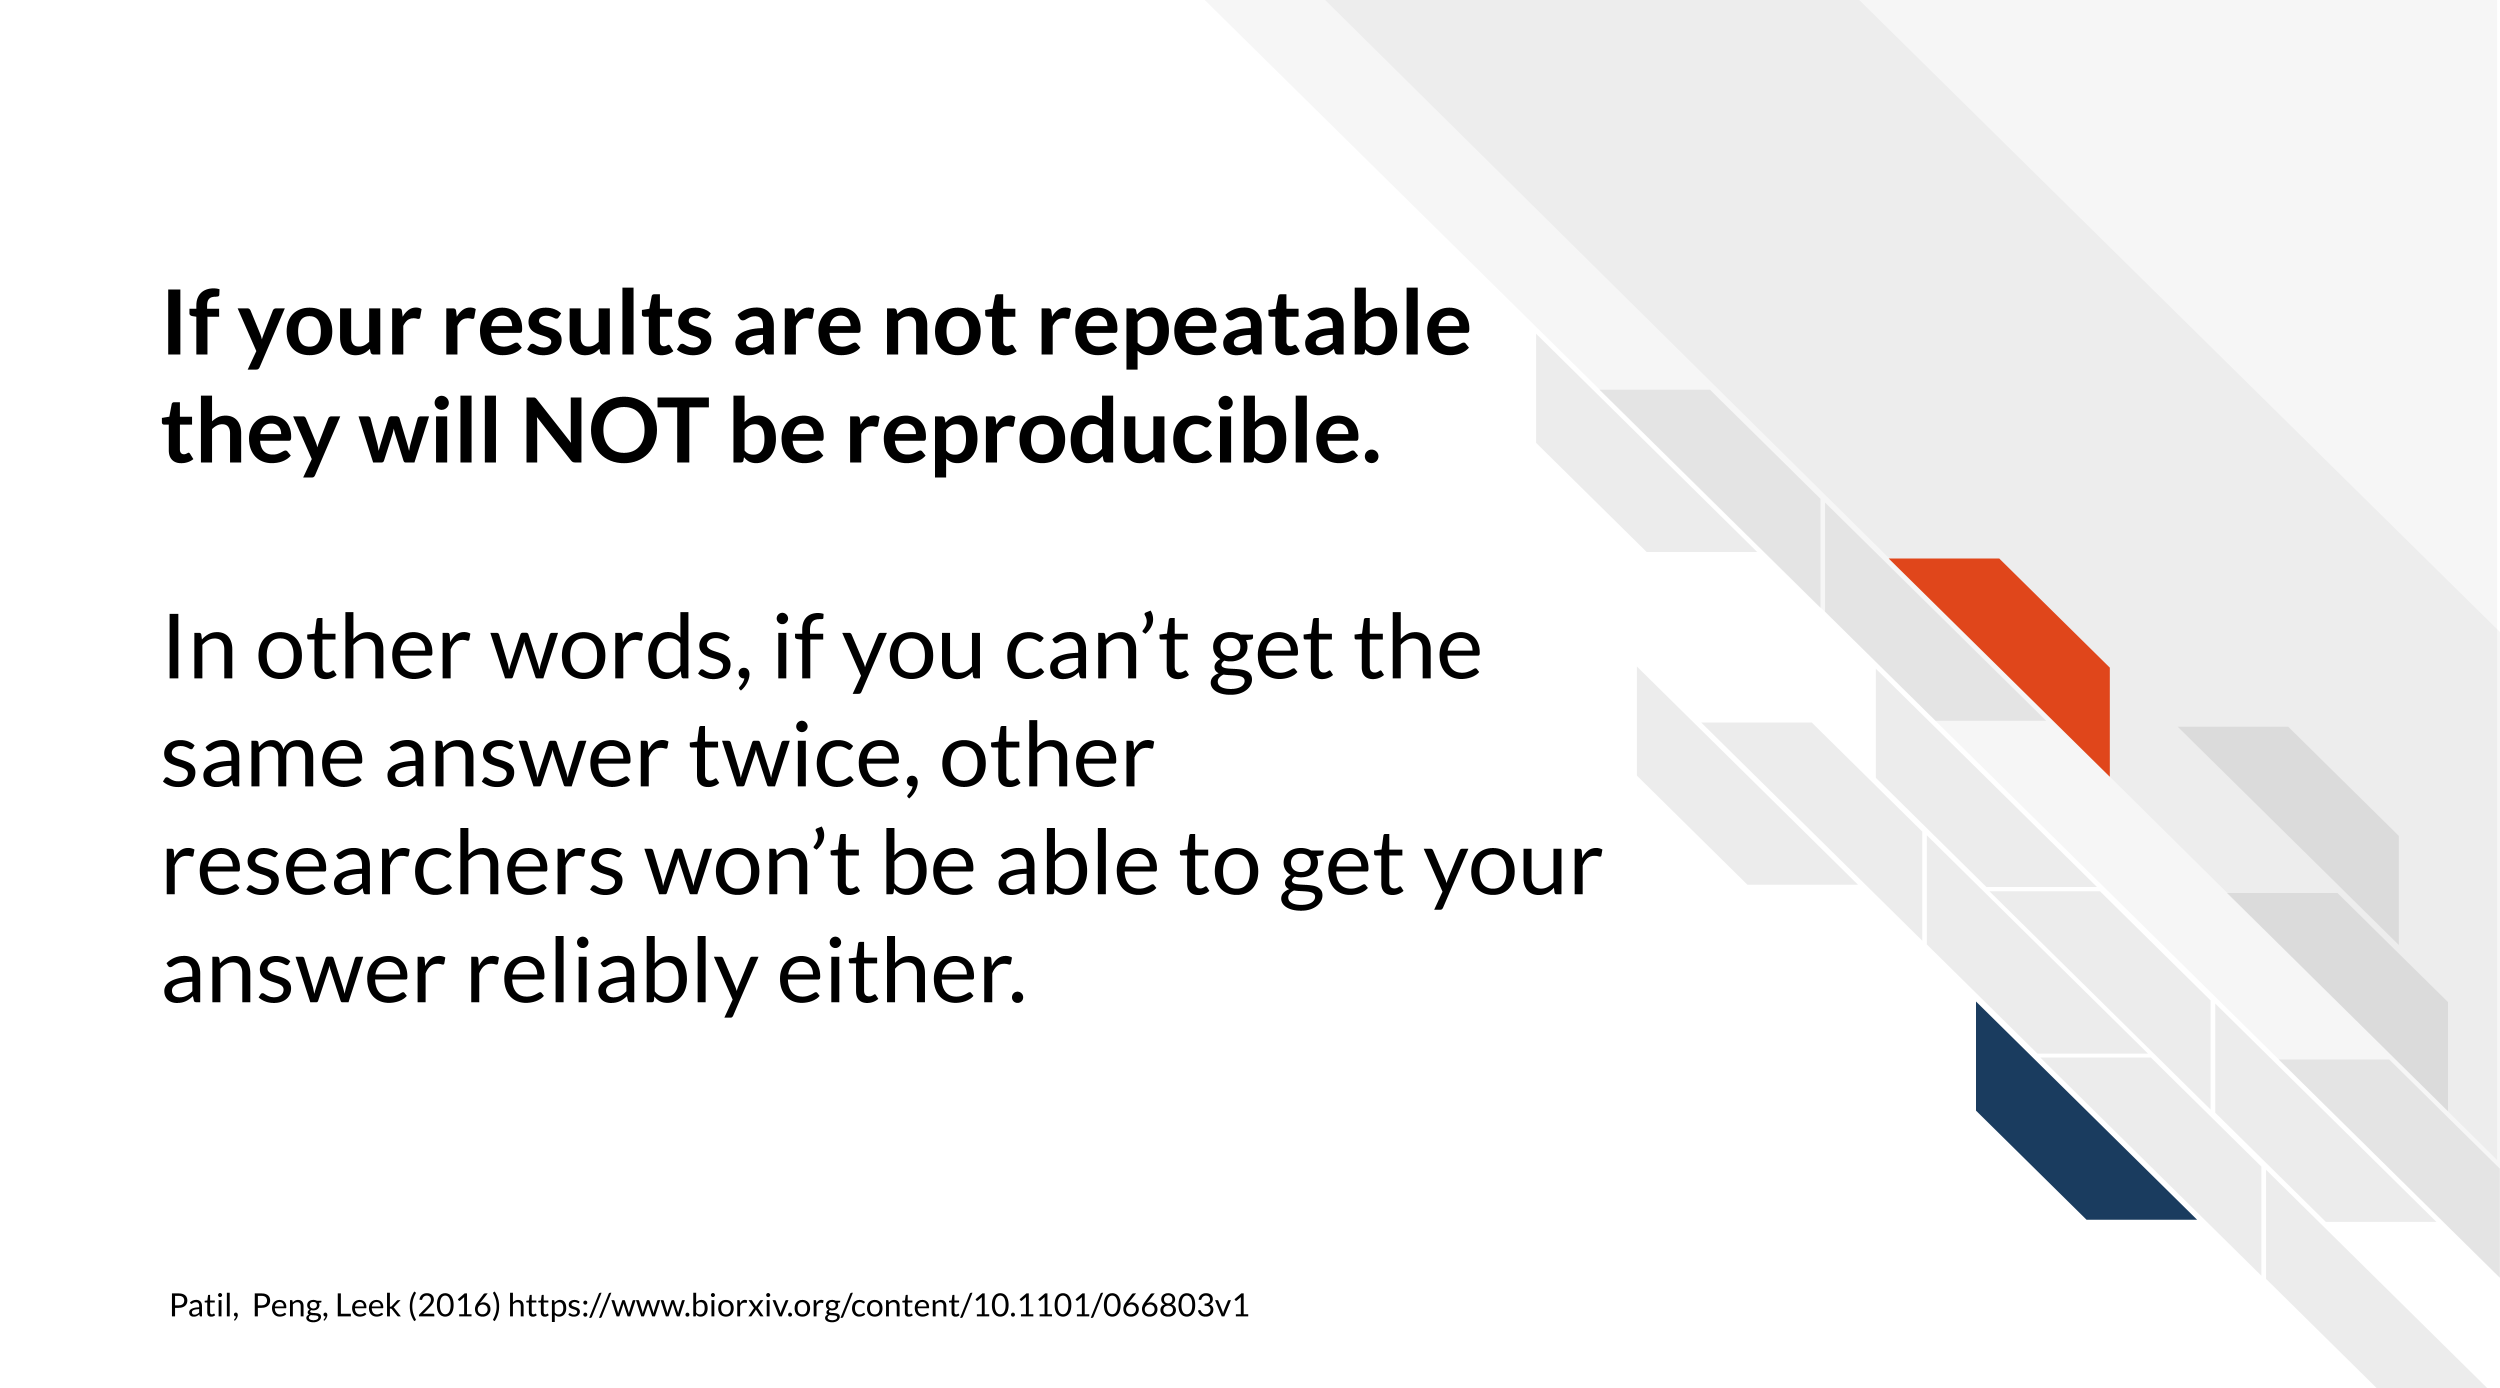 If your results are not repeatable they will NOT be reproducible. In other words, if you can’t get the same answer twice, other researchers won’t be able to get your answer either.